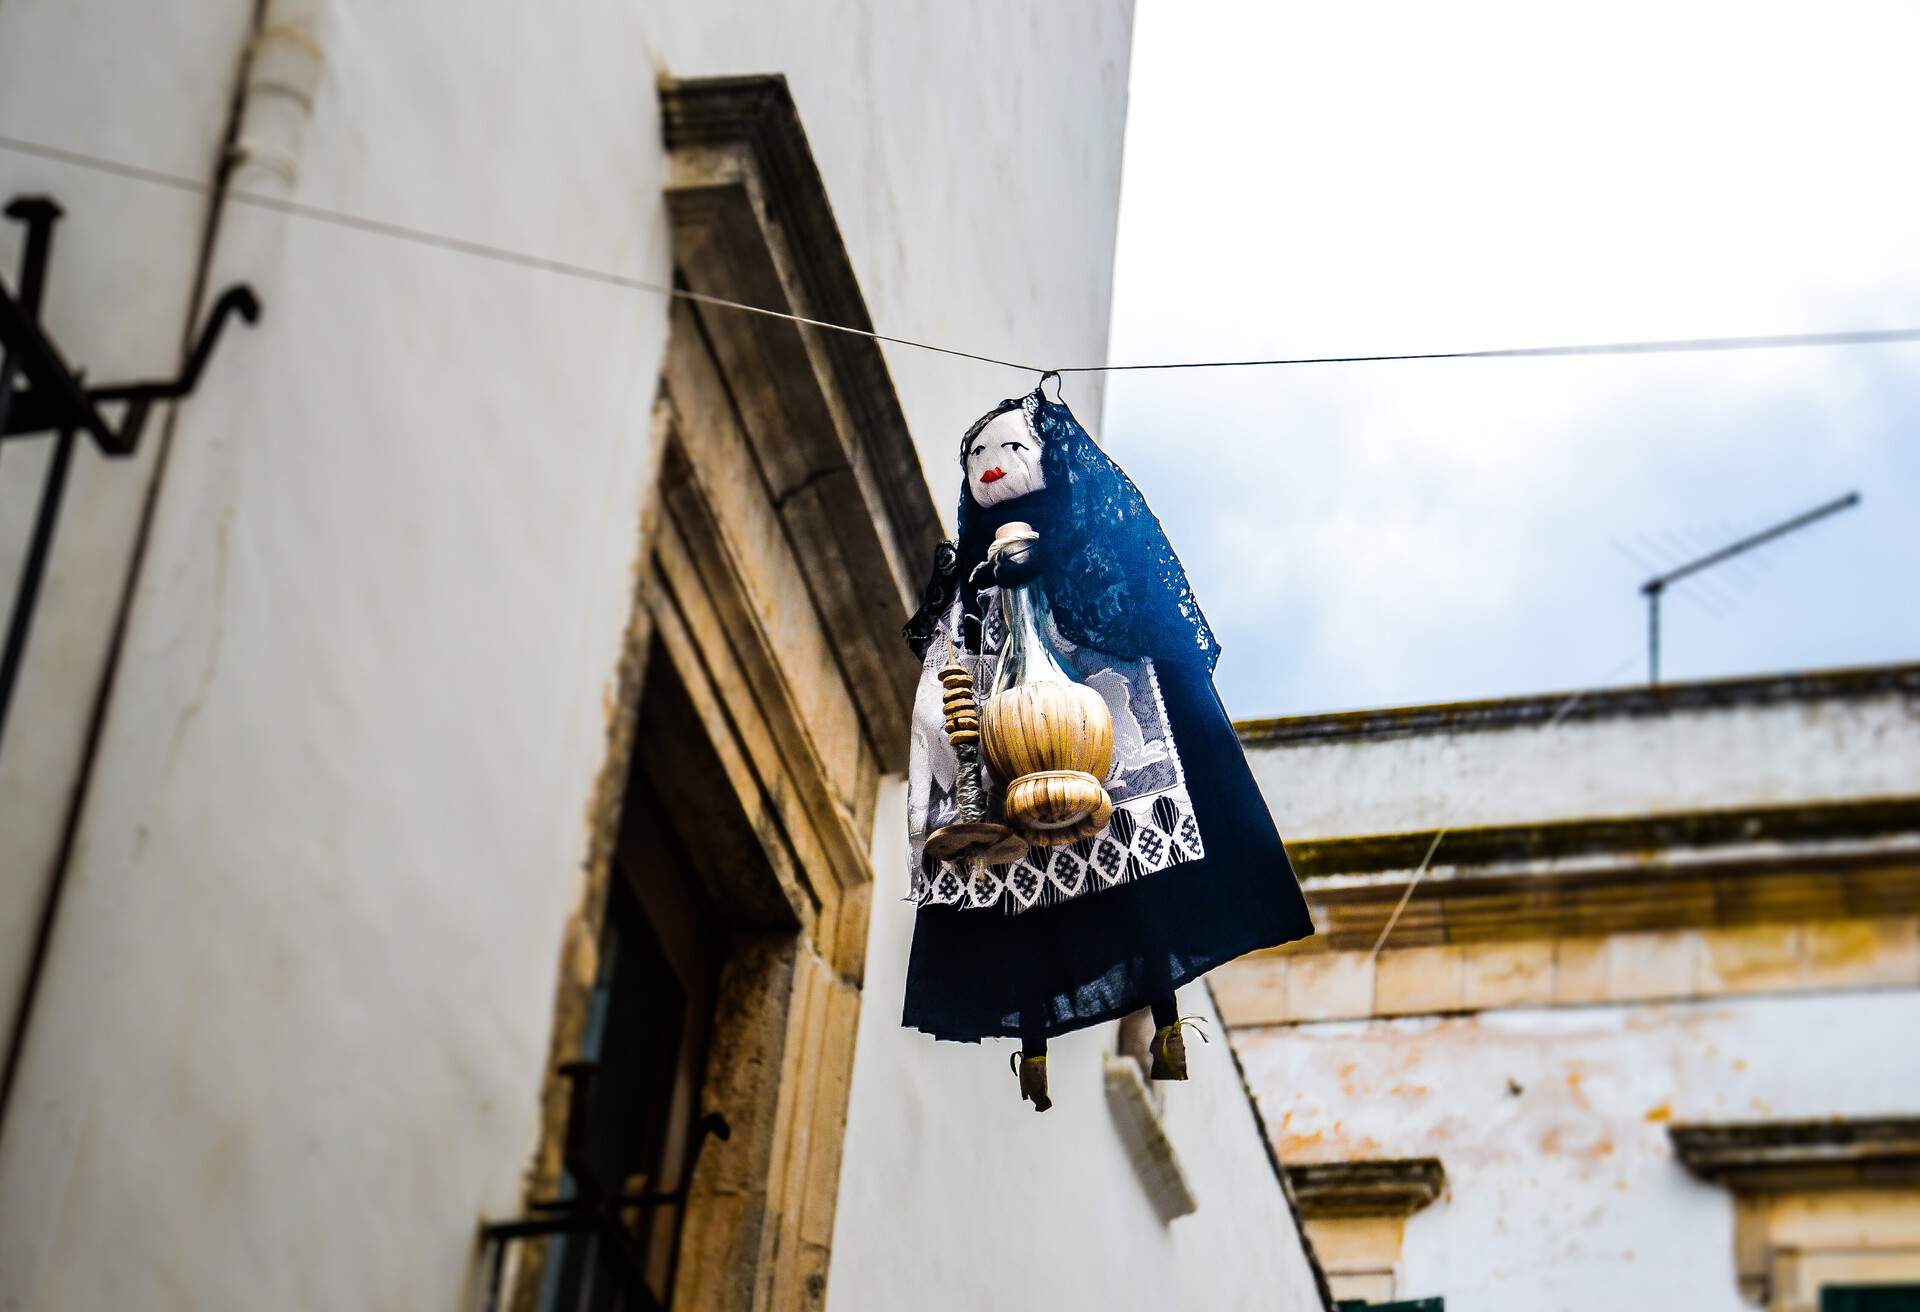 A small doll looking like a woman attached to a string between buildings